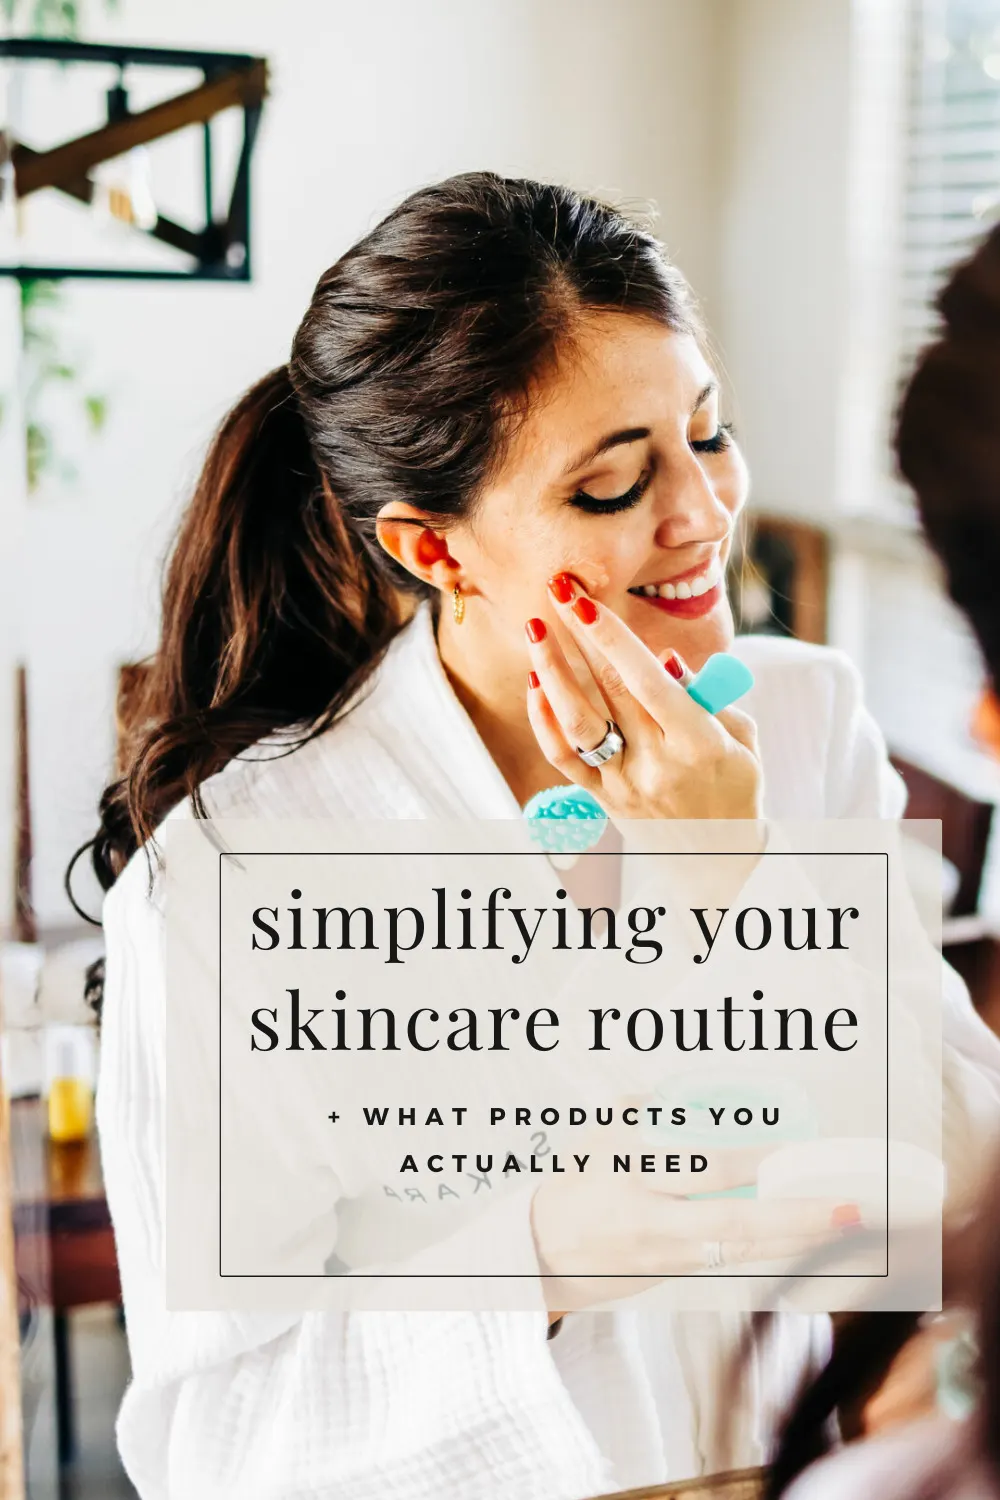 Your skincare should be simple so you can fit more into life. What